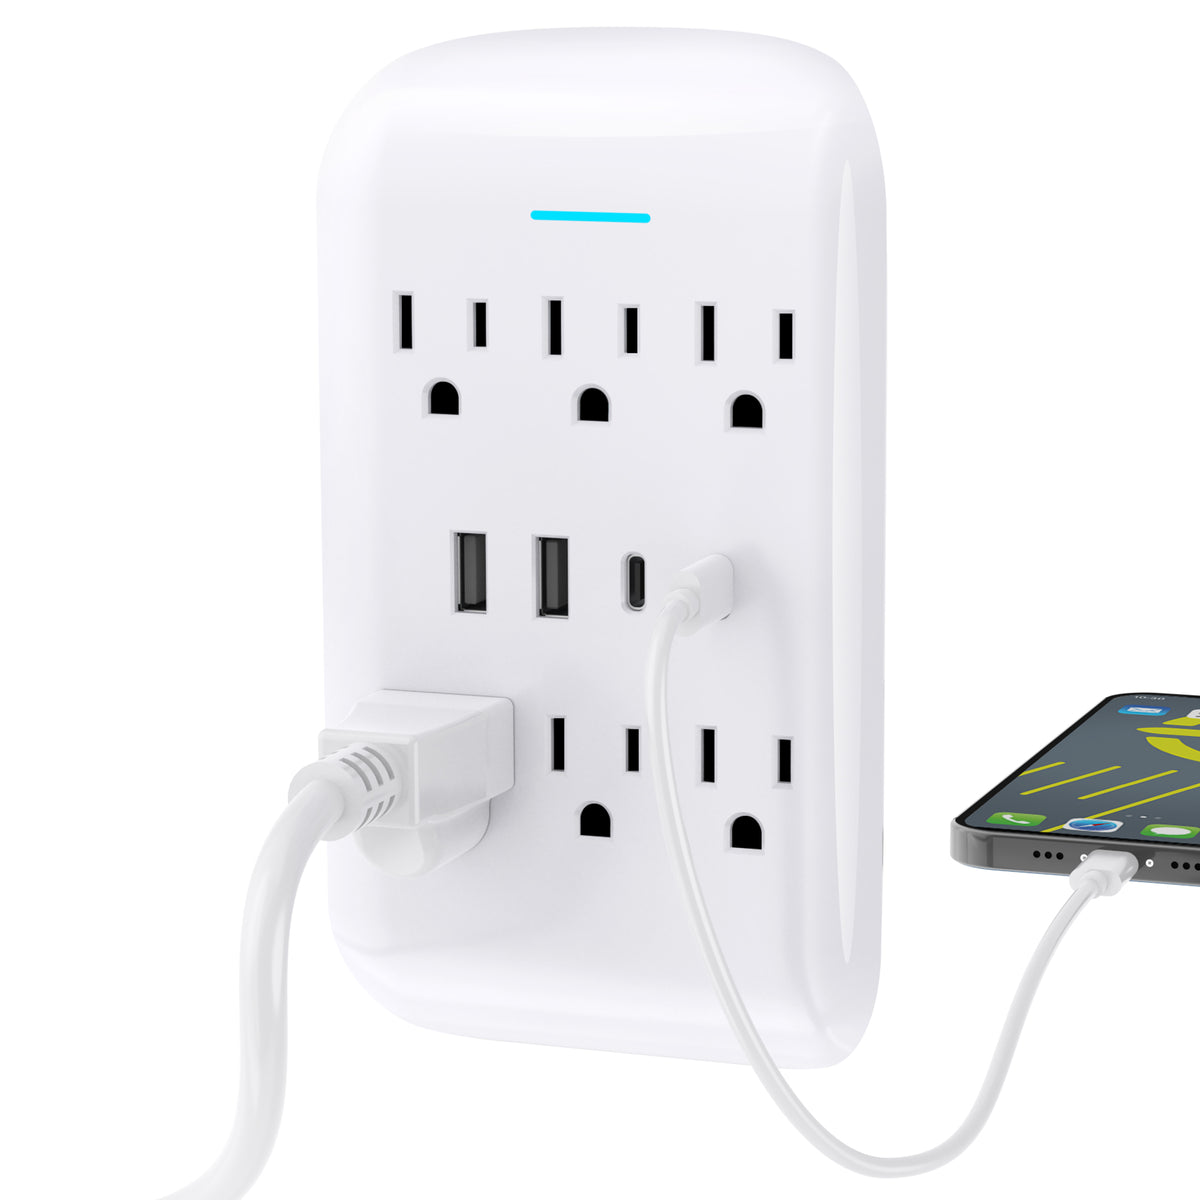 Outlet Extender 10-Port Wall Charger and Surge Protector